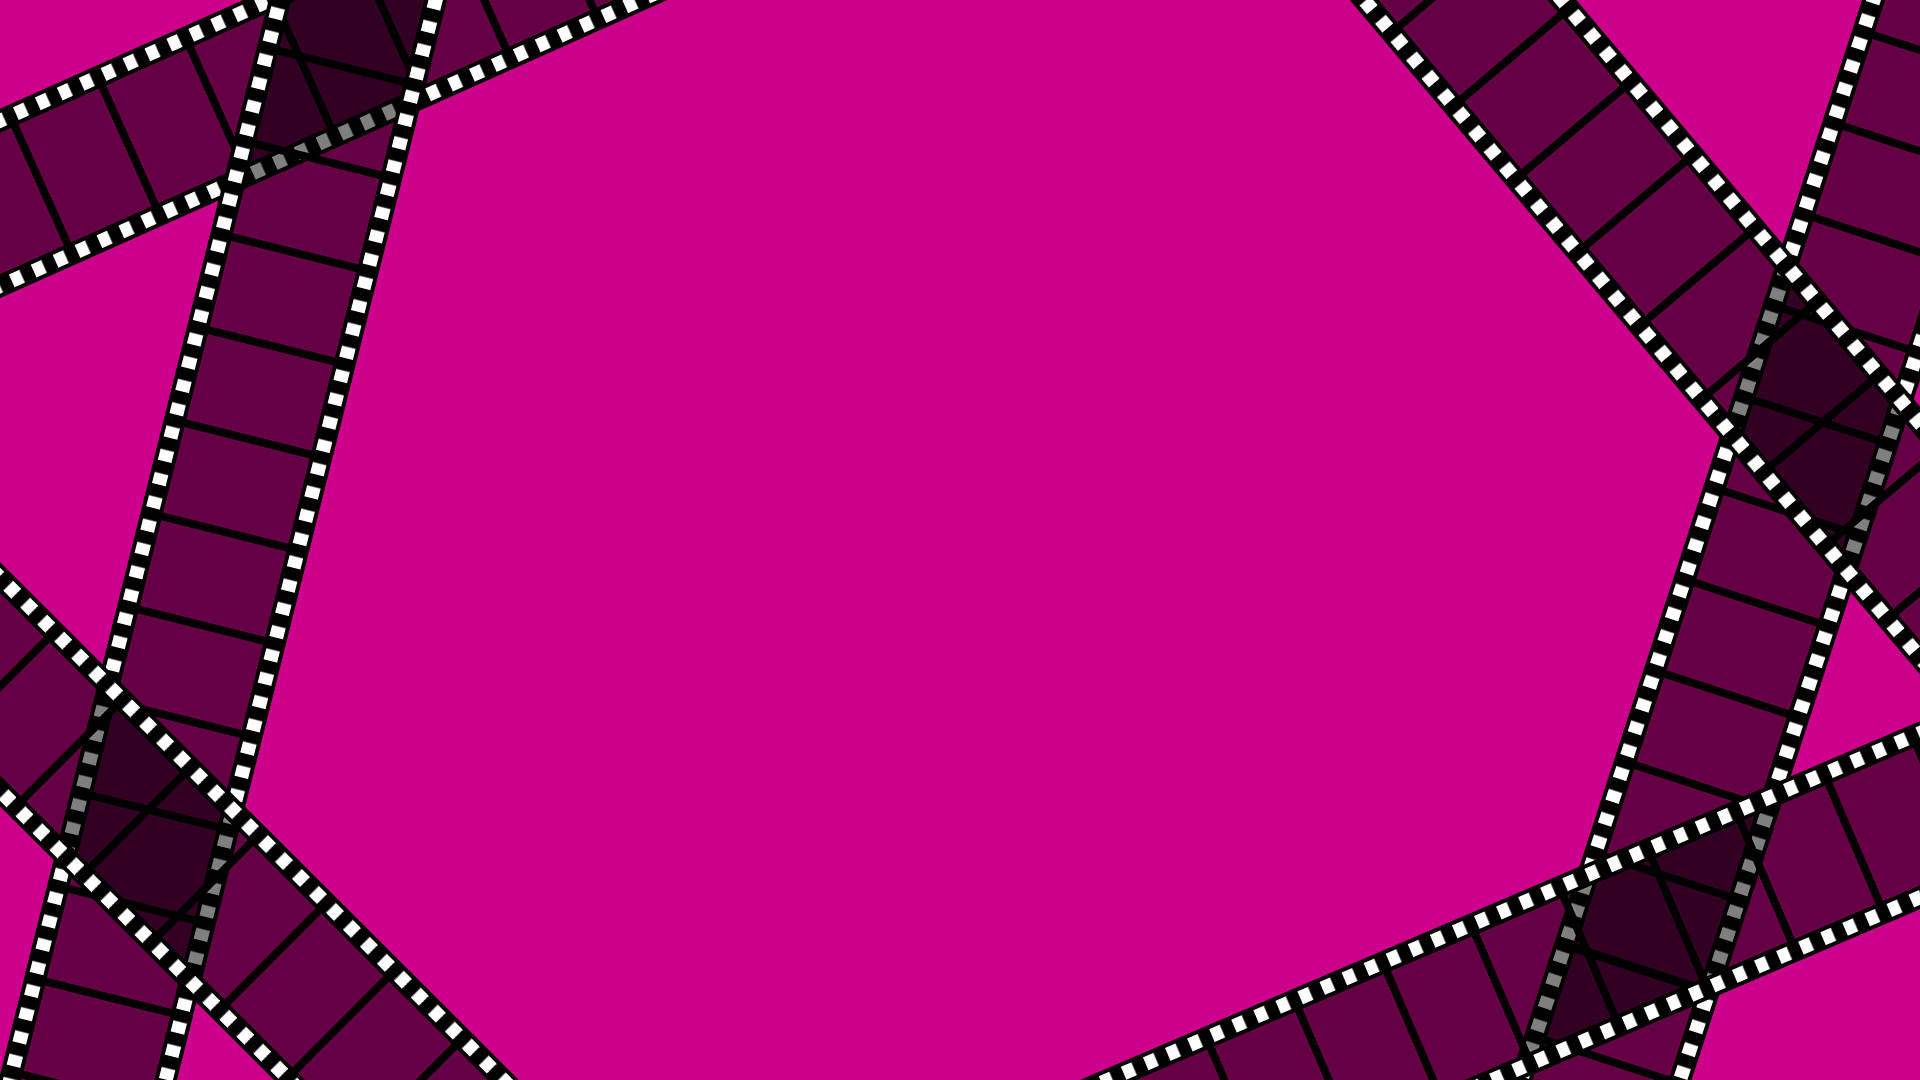 Black And Pink Aesthetic Filmstrip Template Wallpaper